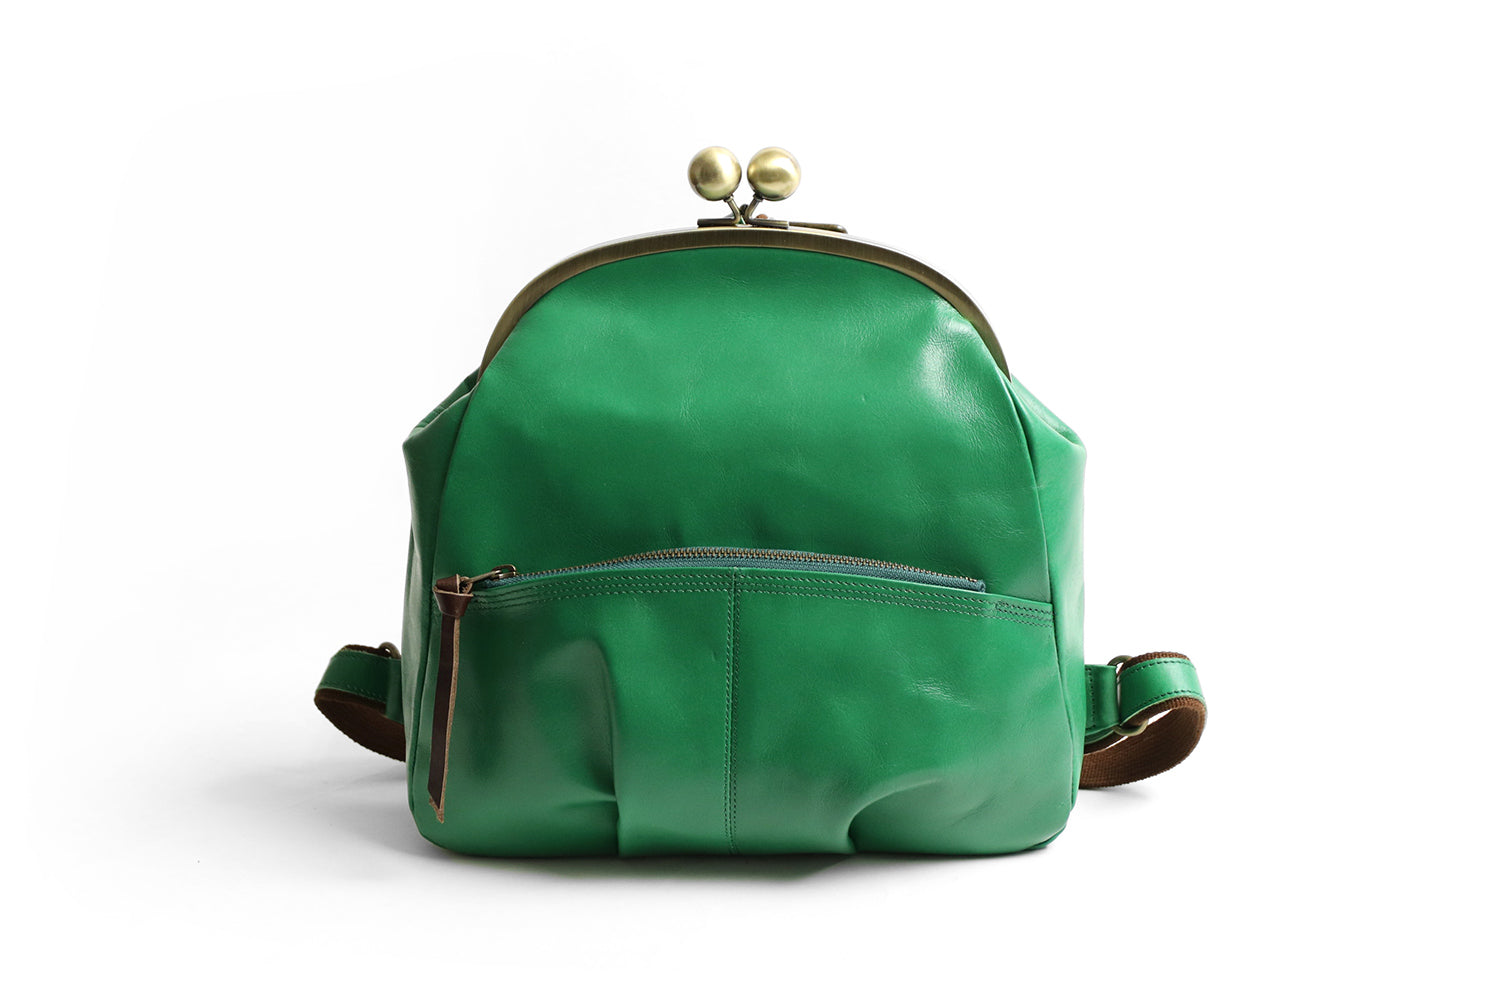 Laisser Faire by LILY / Q's Gamaguchi leather backpack that makes your back look cute 